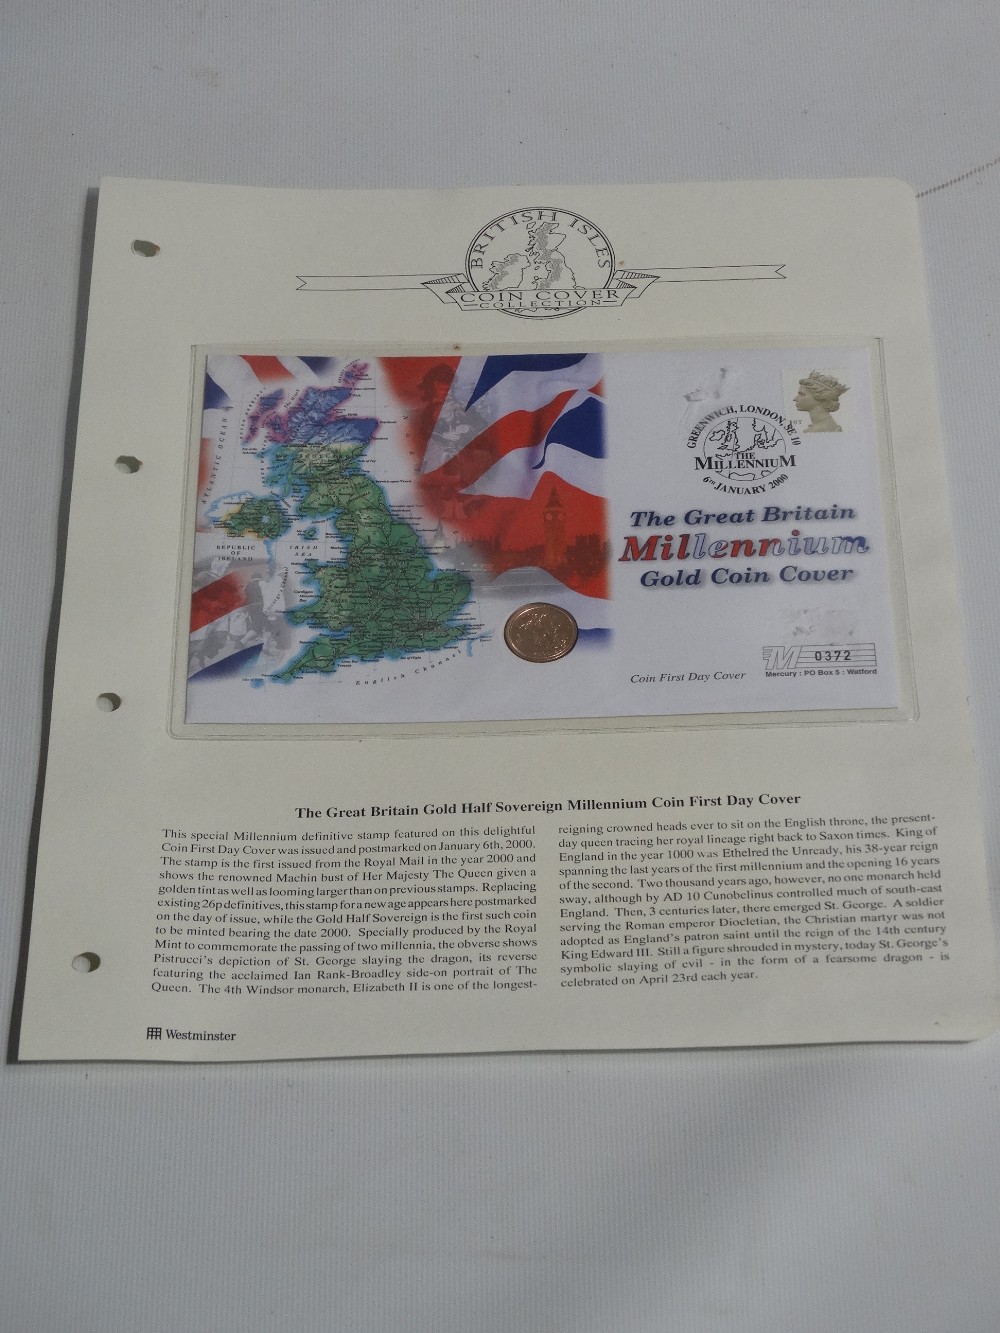 A gold half sovereign millenium first day cover coin.